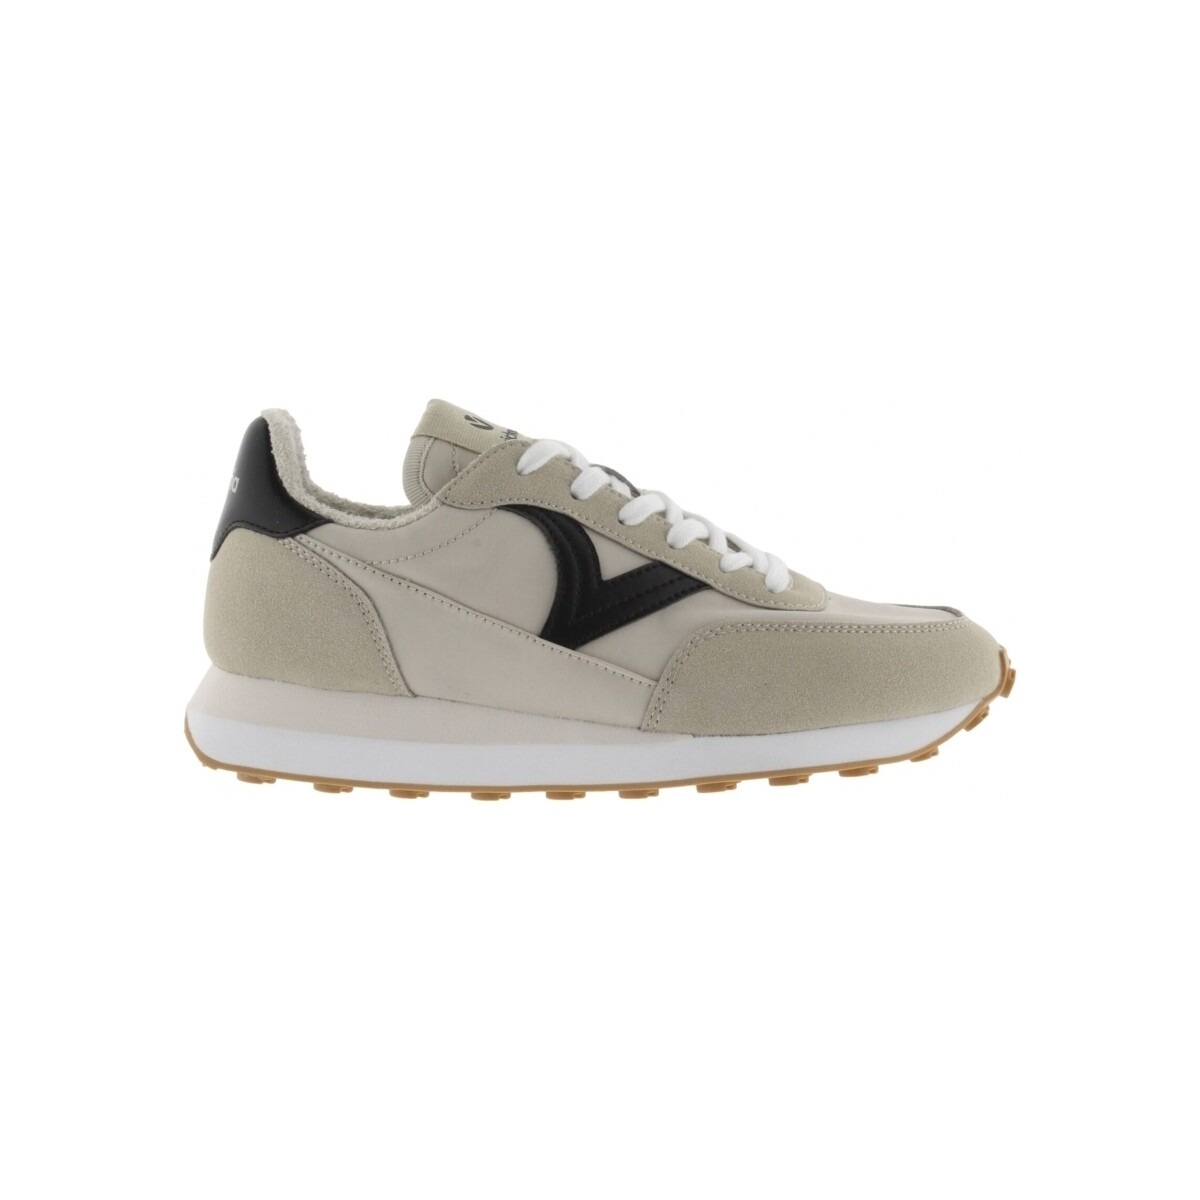 Victoria - Womens Sneakers Beige at Spartoo GOOFASH